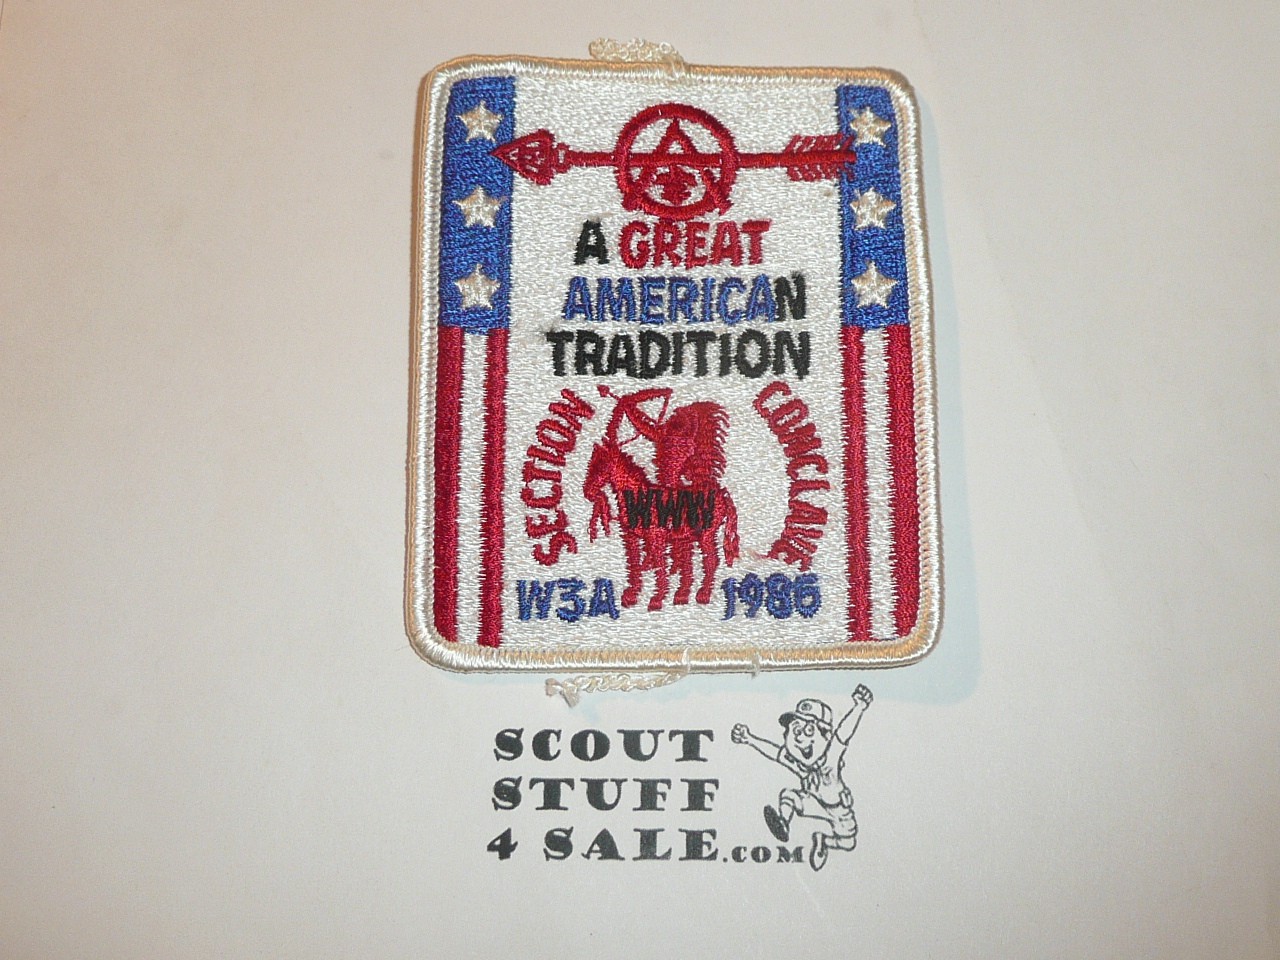 Section W3A 1985 O.A. Conclave Patch - Scout